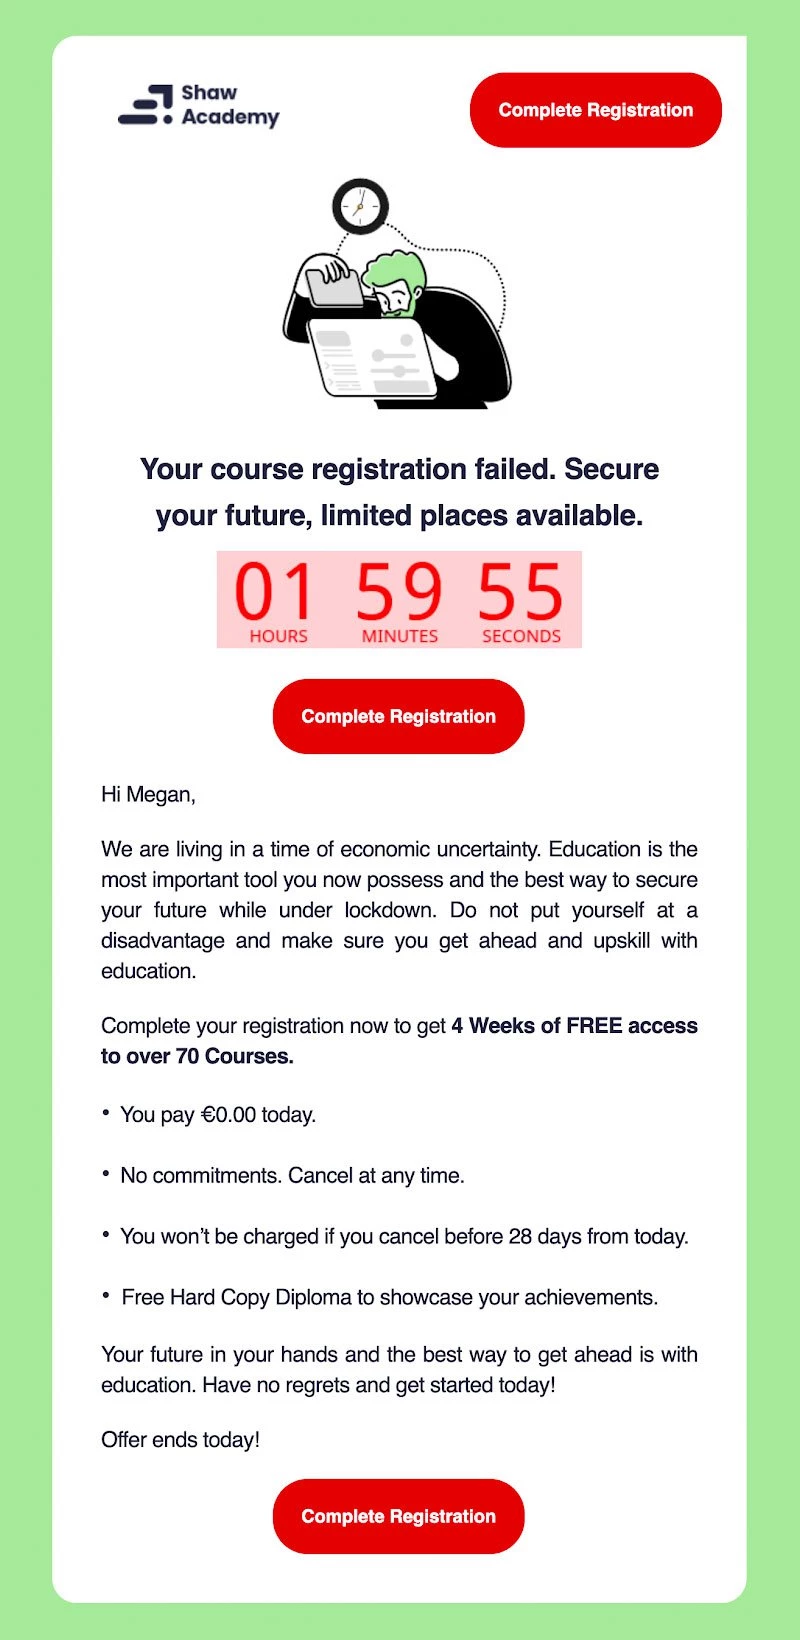 A registration reminded email example from Shaw Academy.